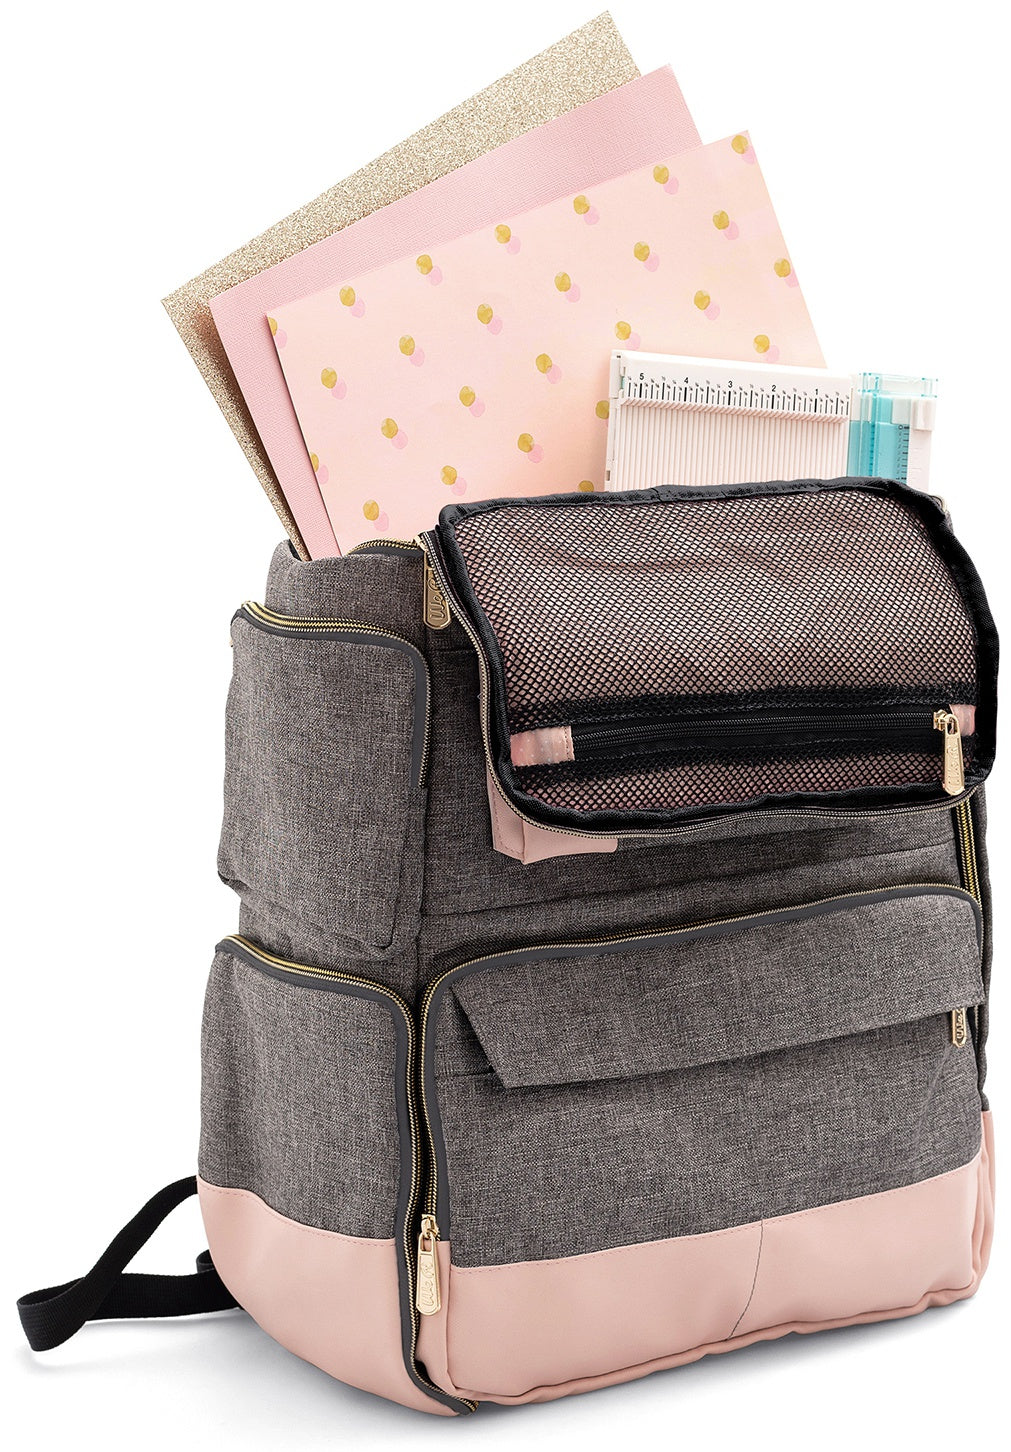 We R Memory Keepers Crafter's Backpack-Pink